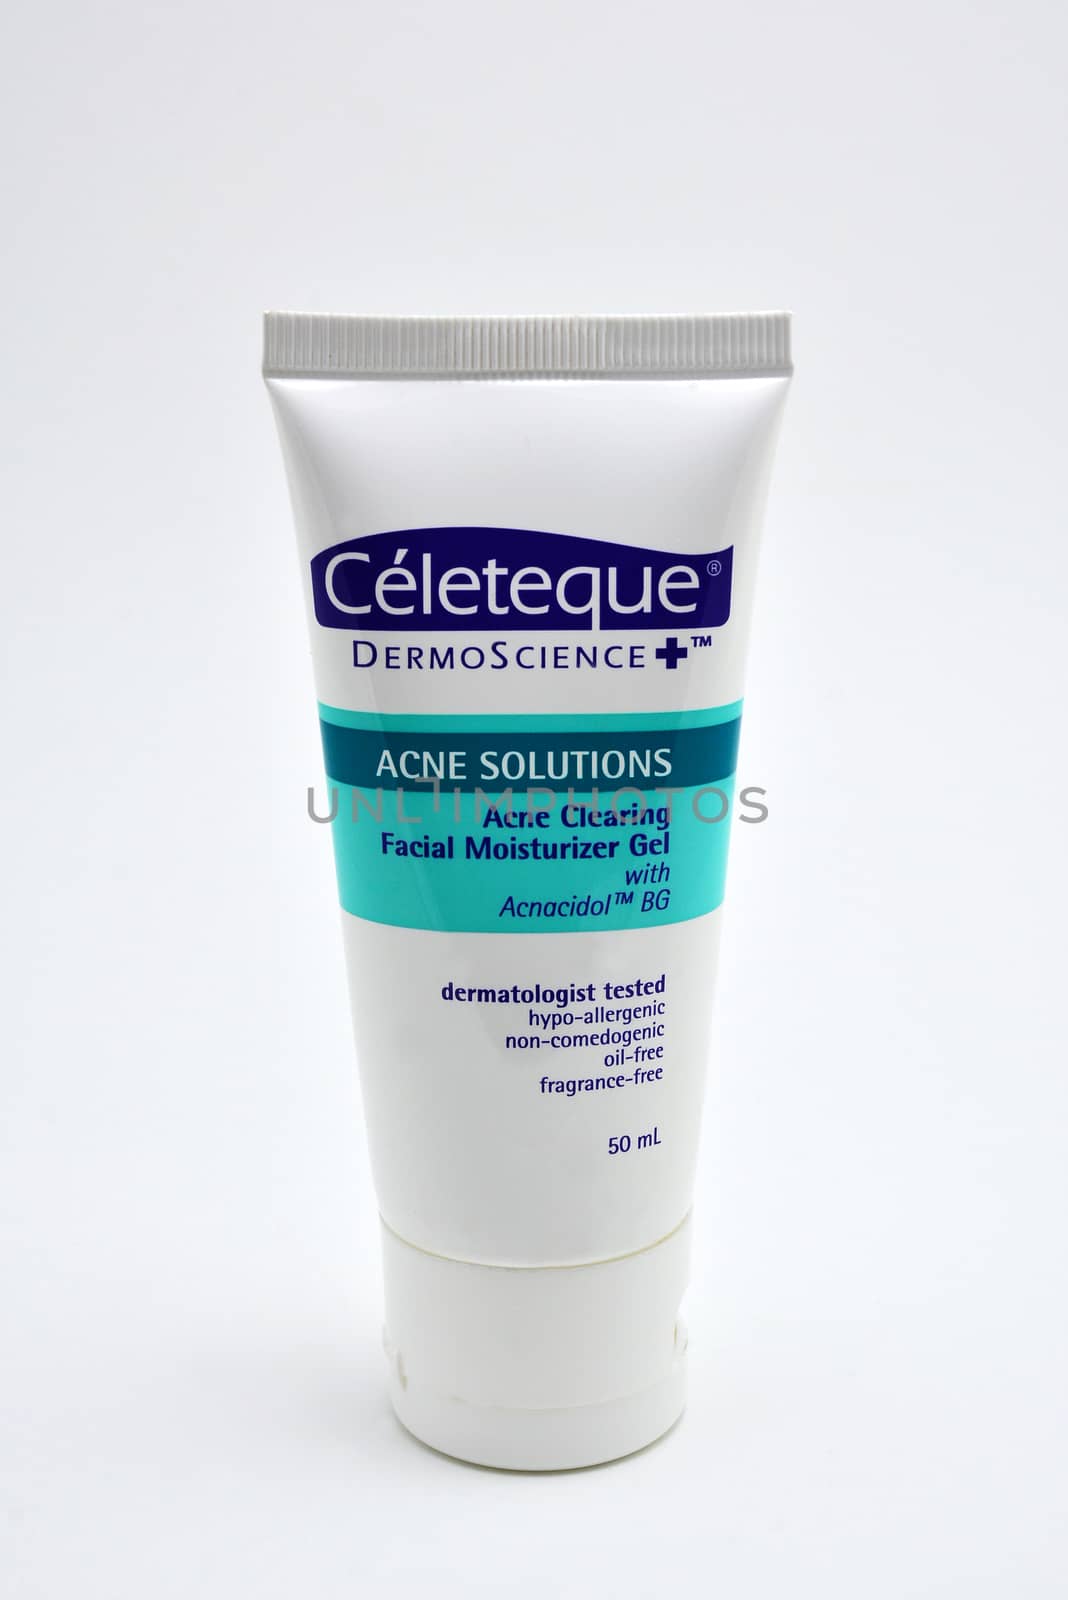 MANILA, PH - JULY 10 - Celeteque acne solutions acne clearing facial moisturizer gel on July 10, 2020 in Manila, Philippines.